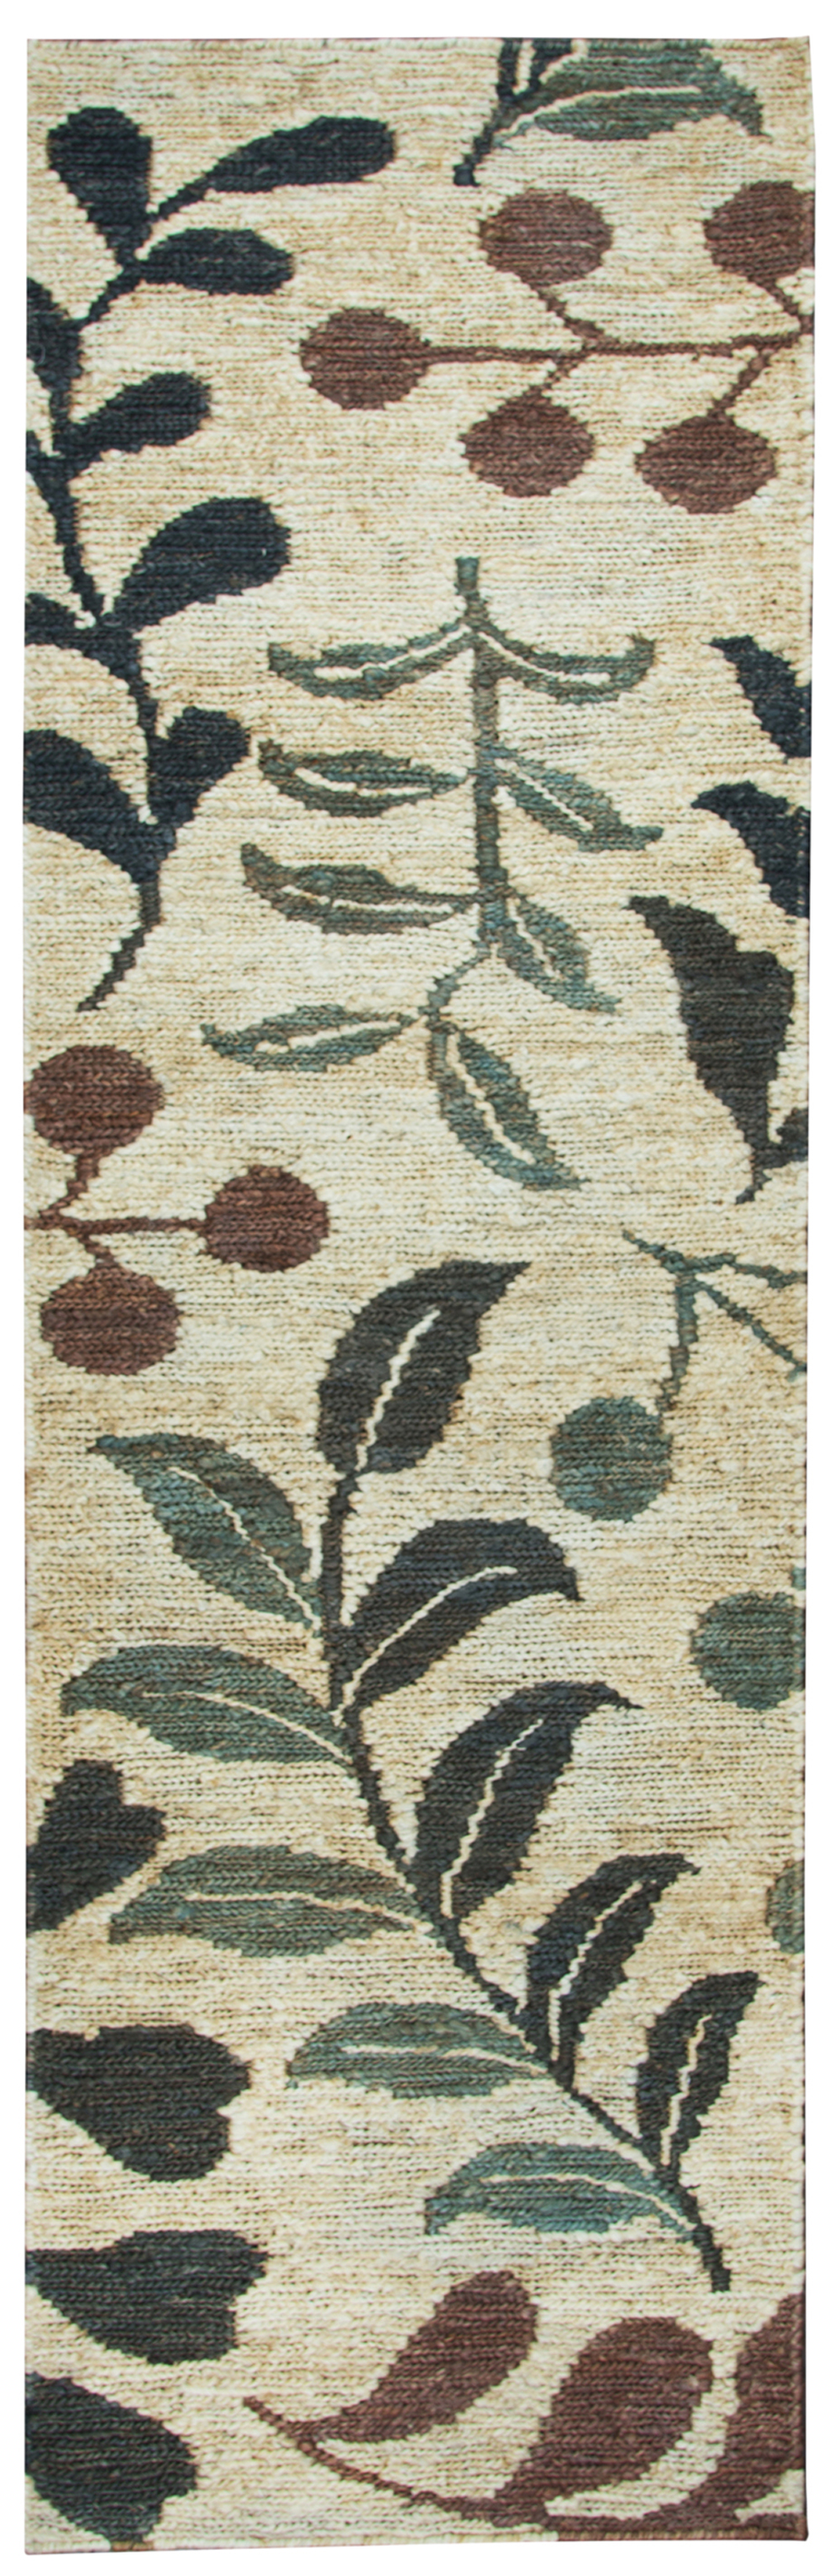 Rizzy Home Whittier WR9626 Natural Rug